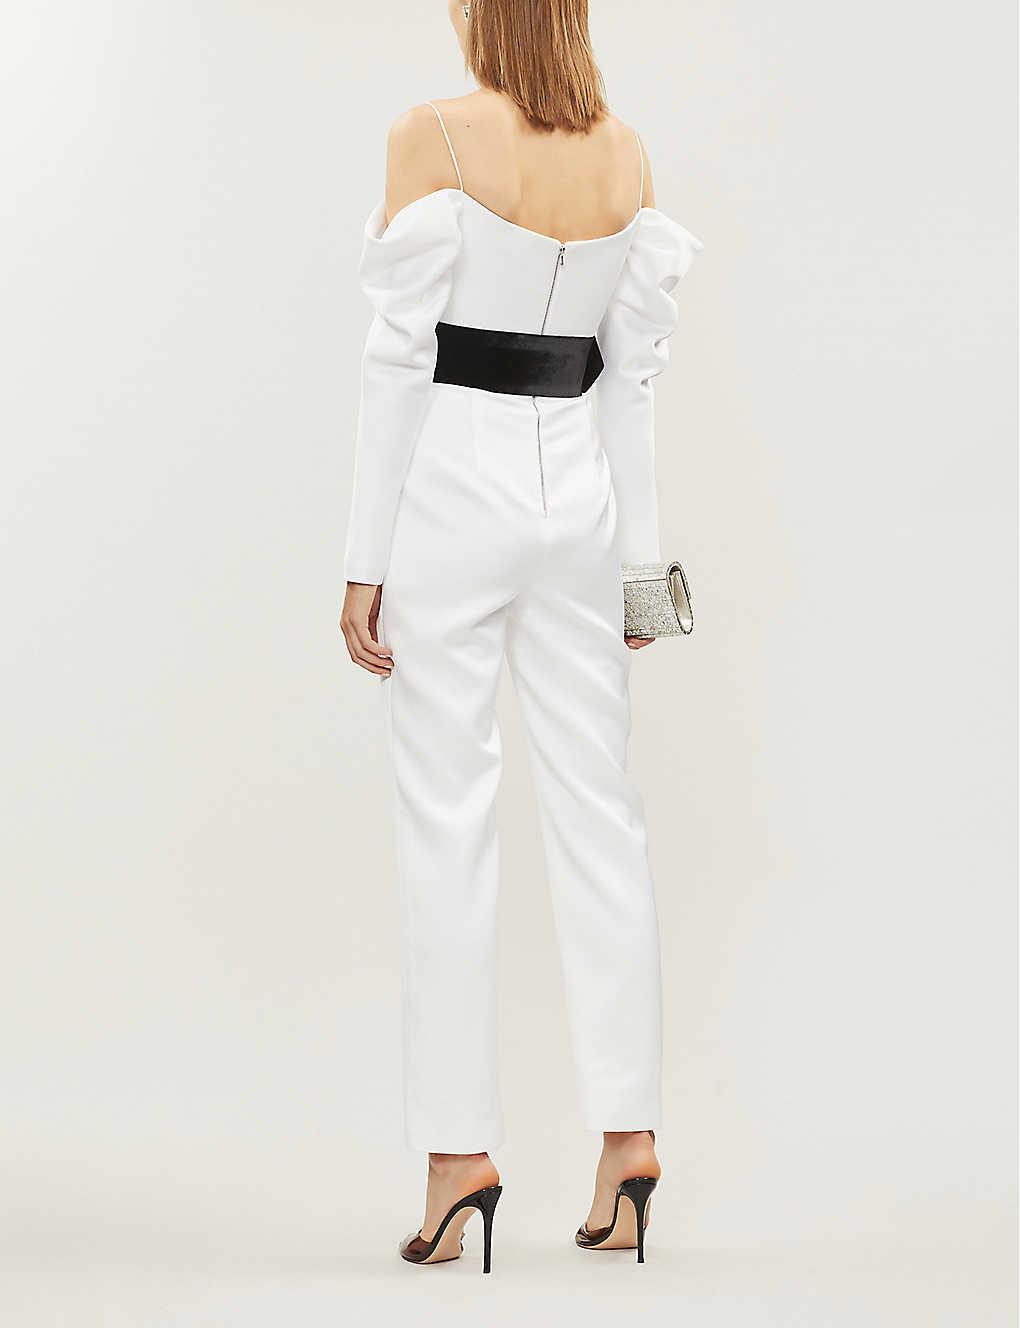 Rasario Off-the-shoulder Satin Jumpsuit in White - Lyst